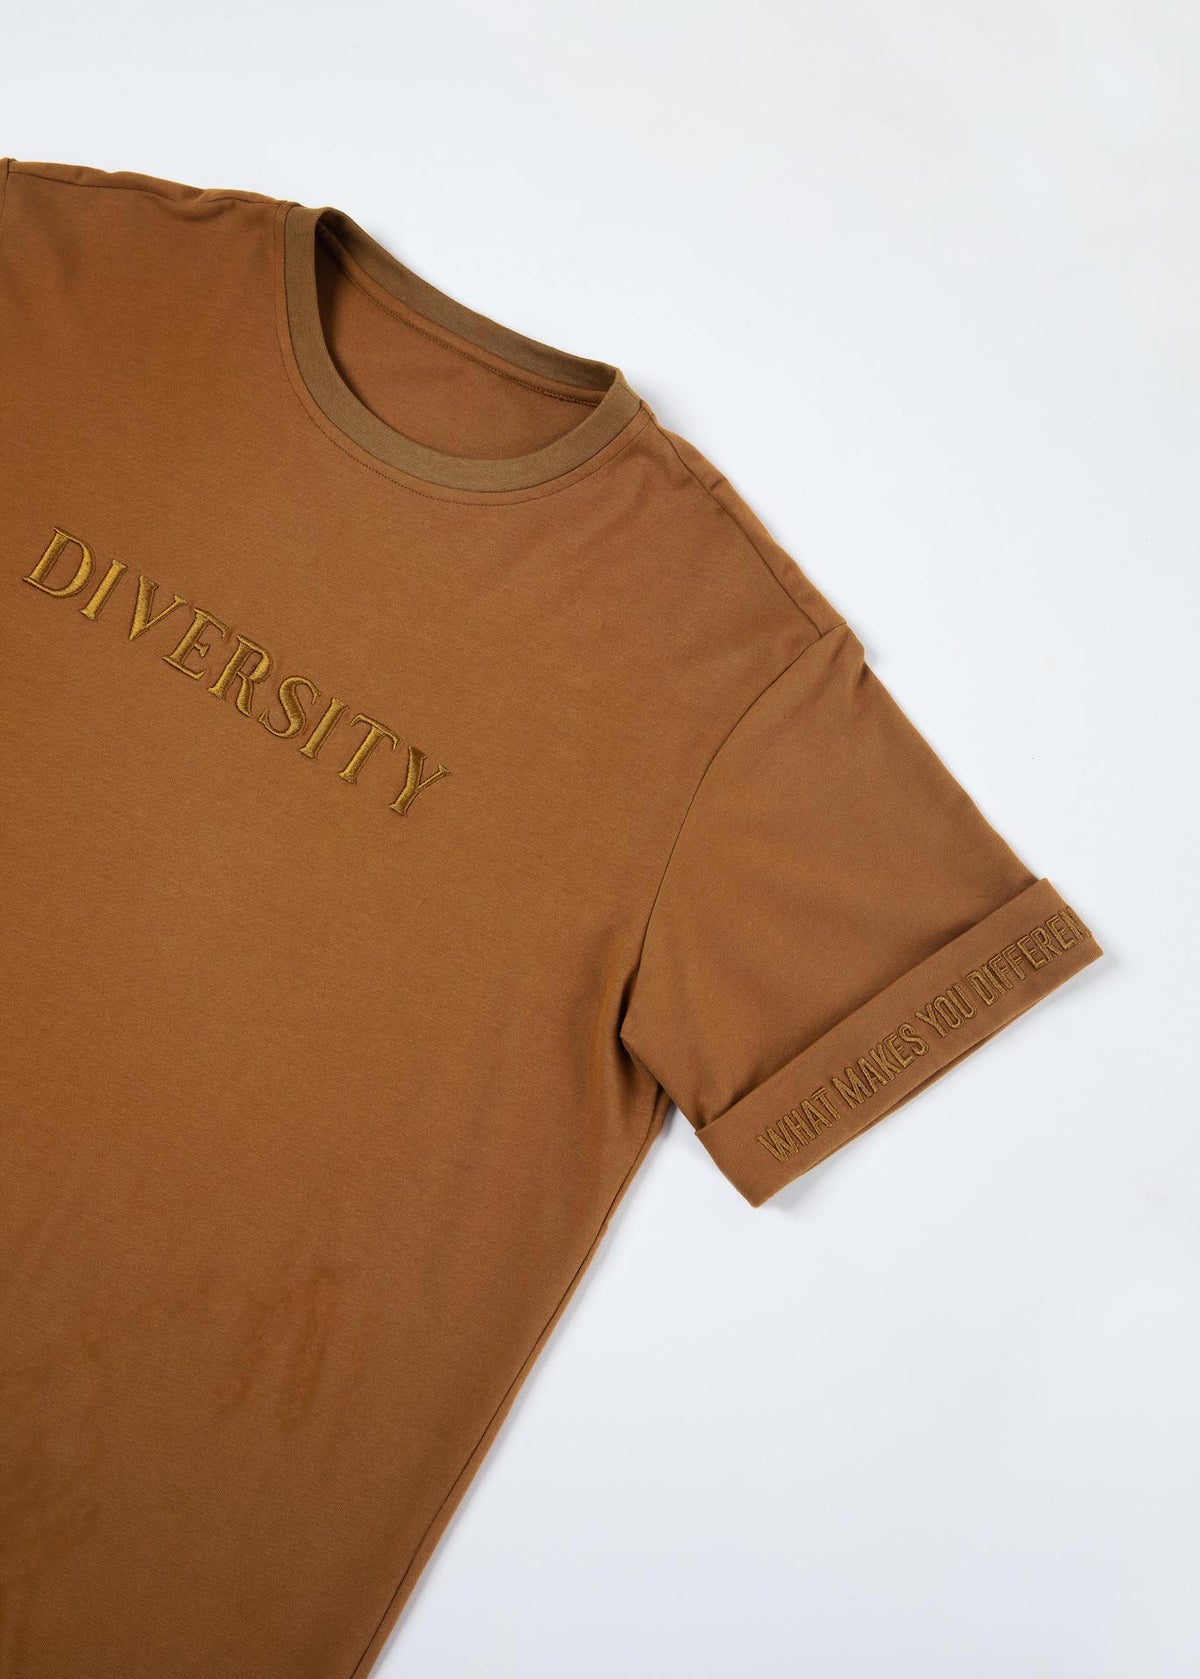 Diversity Embroidered T-Shirt